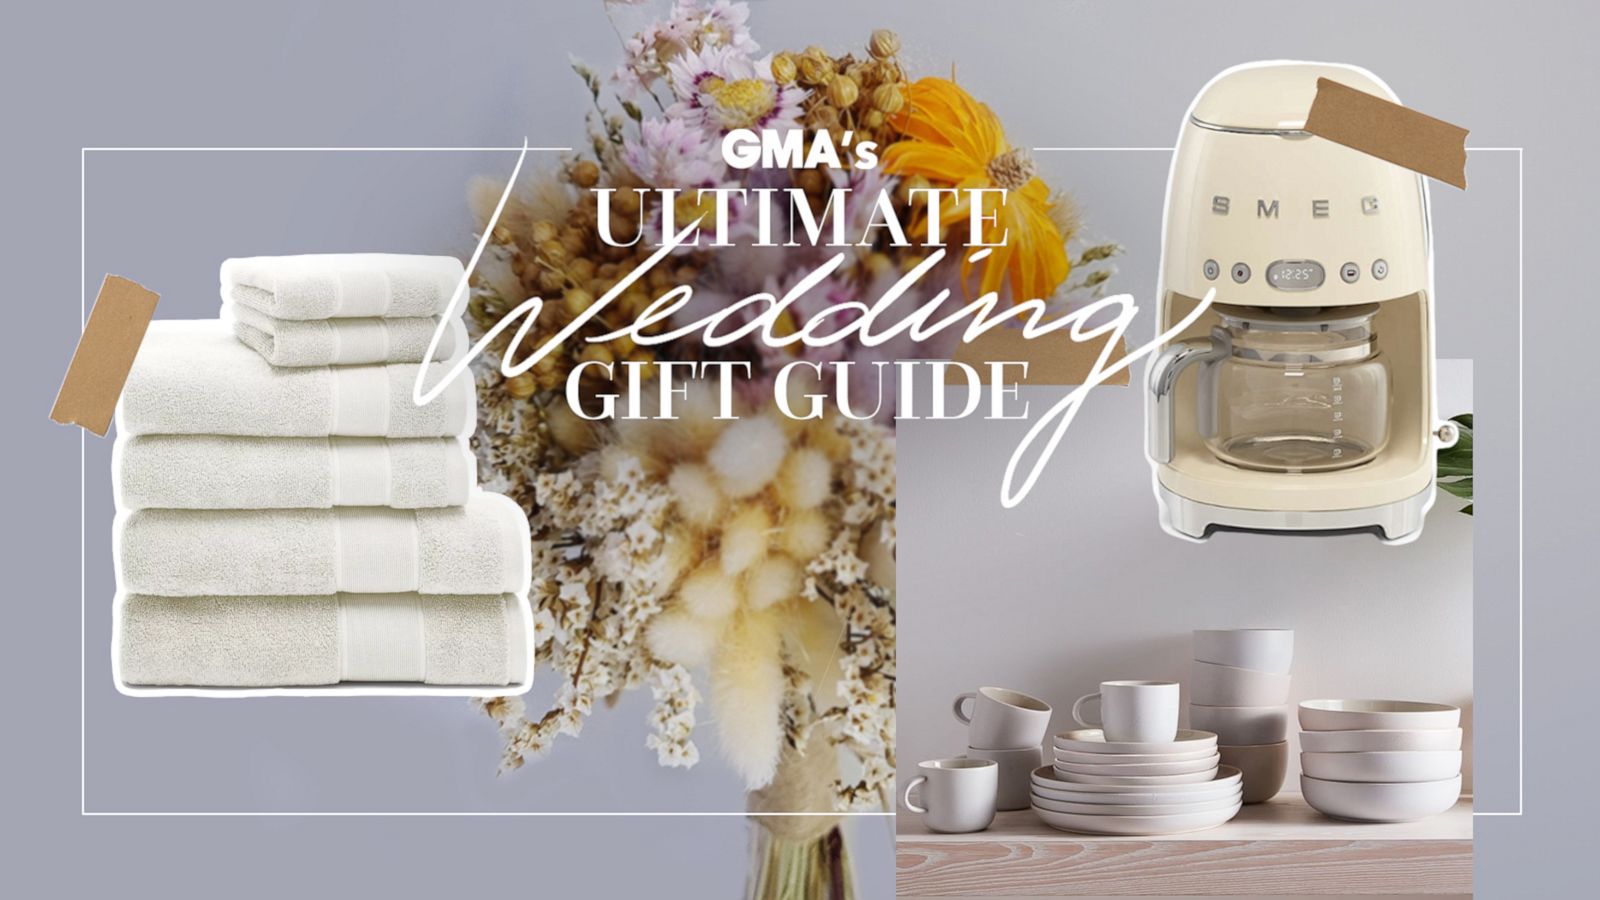 The Most Popular Wedding Registry Items by State According to Zola